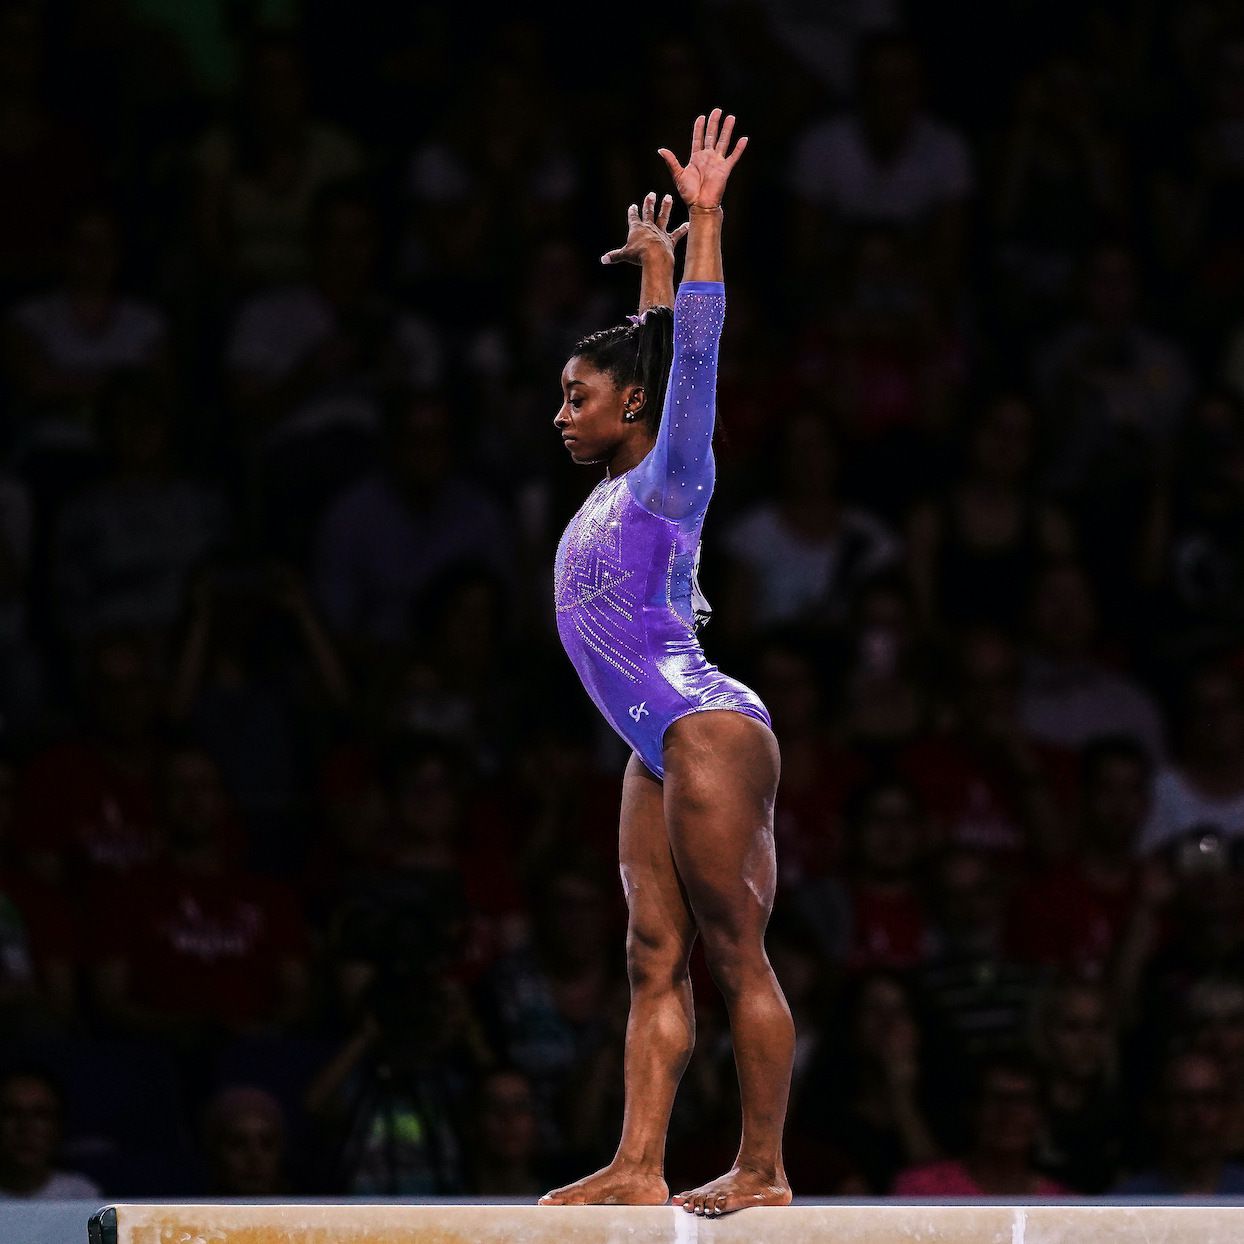 Simone Biles Hasn't Done This Gymnastics Move In a Decade&mdash;But She Still Nailed It